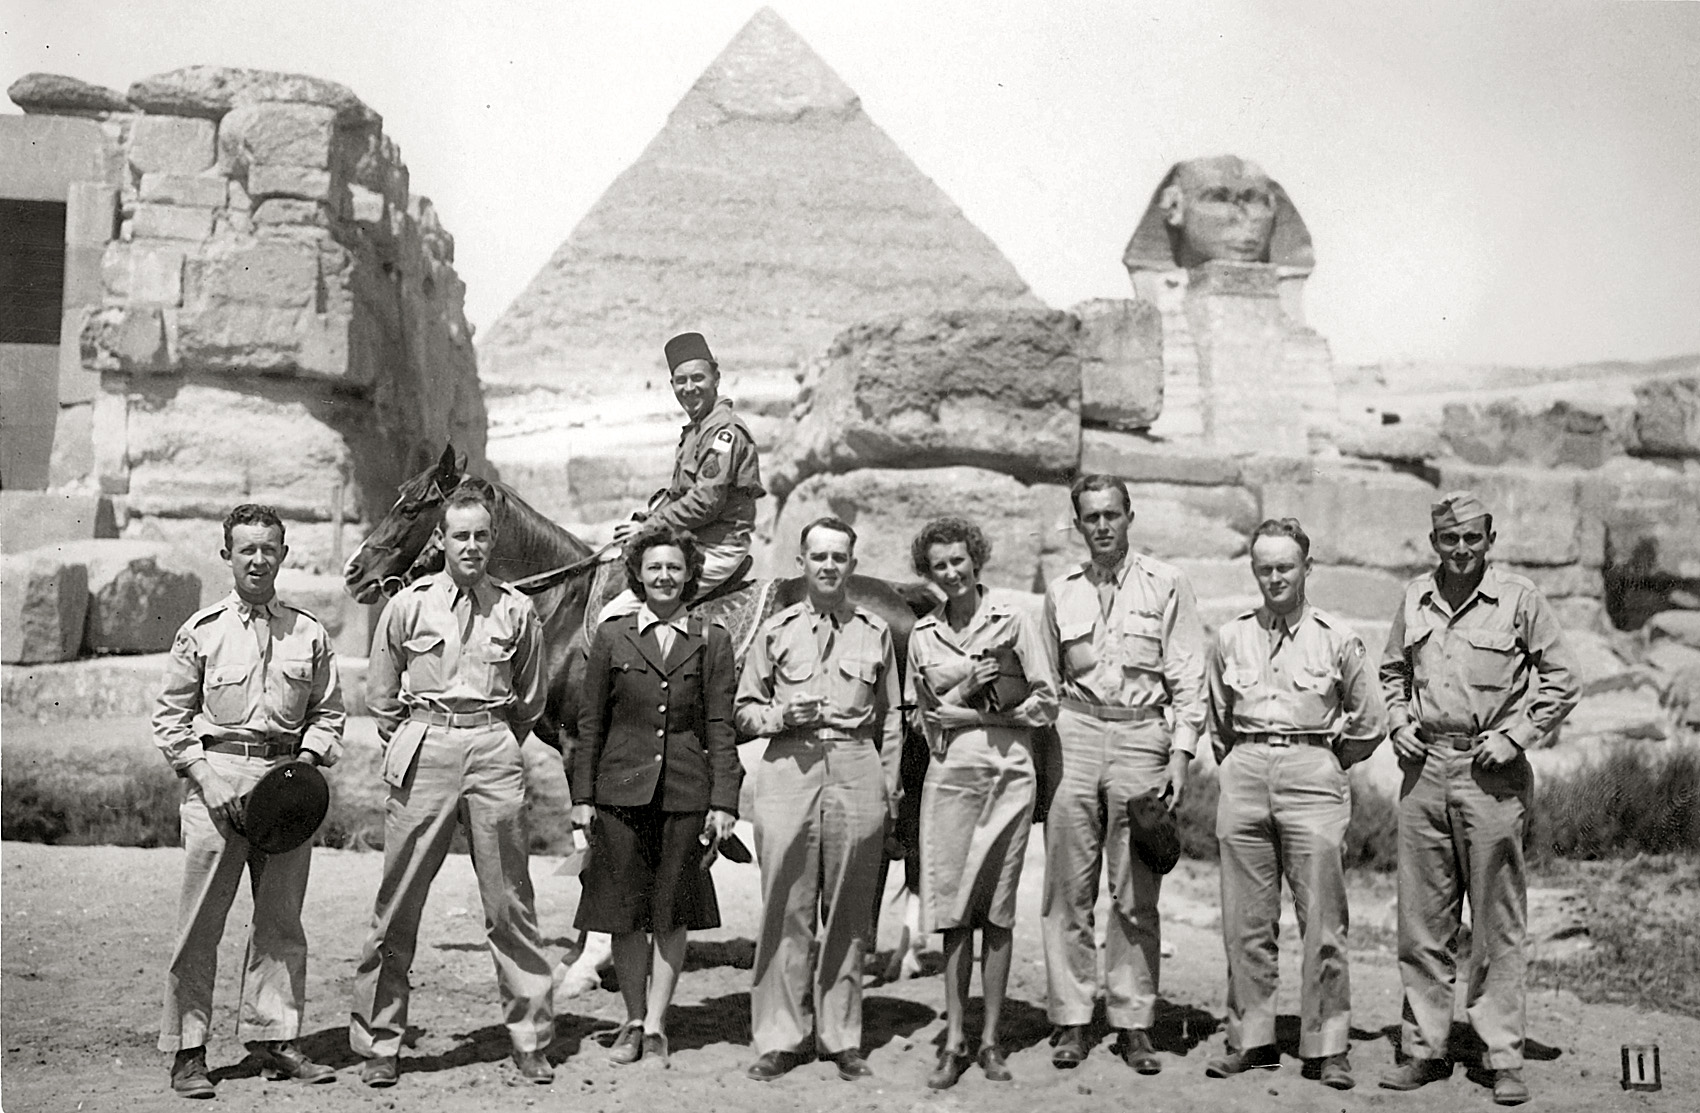 Here's my grandfather again, at the Pyramids in Egypt in 1944 or 45. He's the tallest guy, just to the right of center. I don't know who the other people are or what's going on, sadly. View full size.